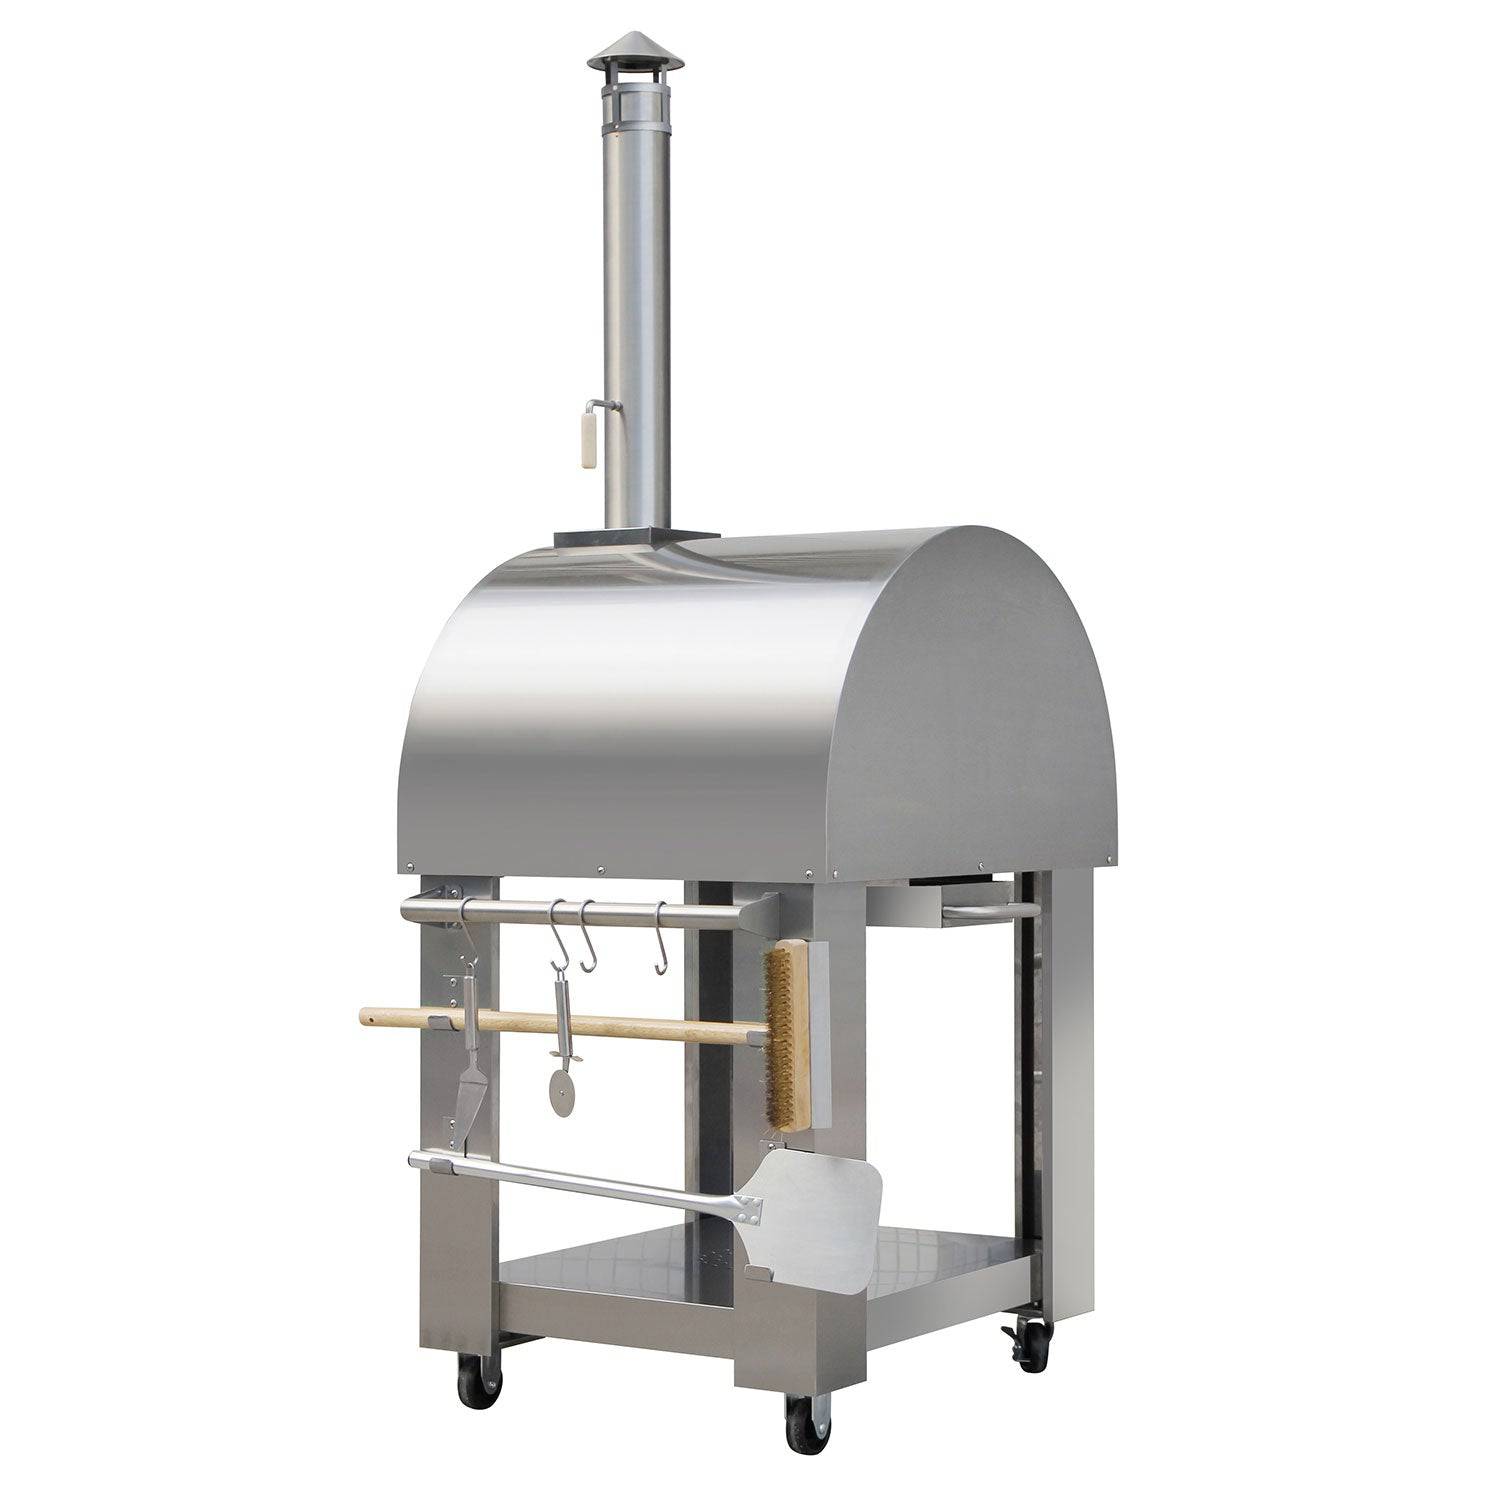 Fobest Kitchen Stainless Steel Freestanding Wood Burning Outdoor Pizza Oven - Pizza Oven-Fobest Appliance